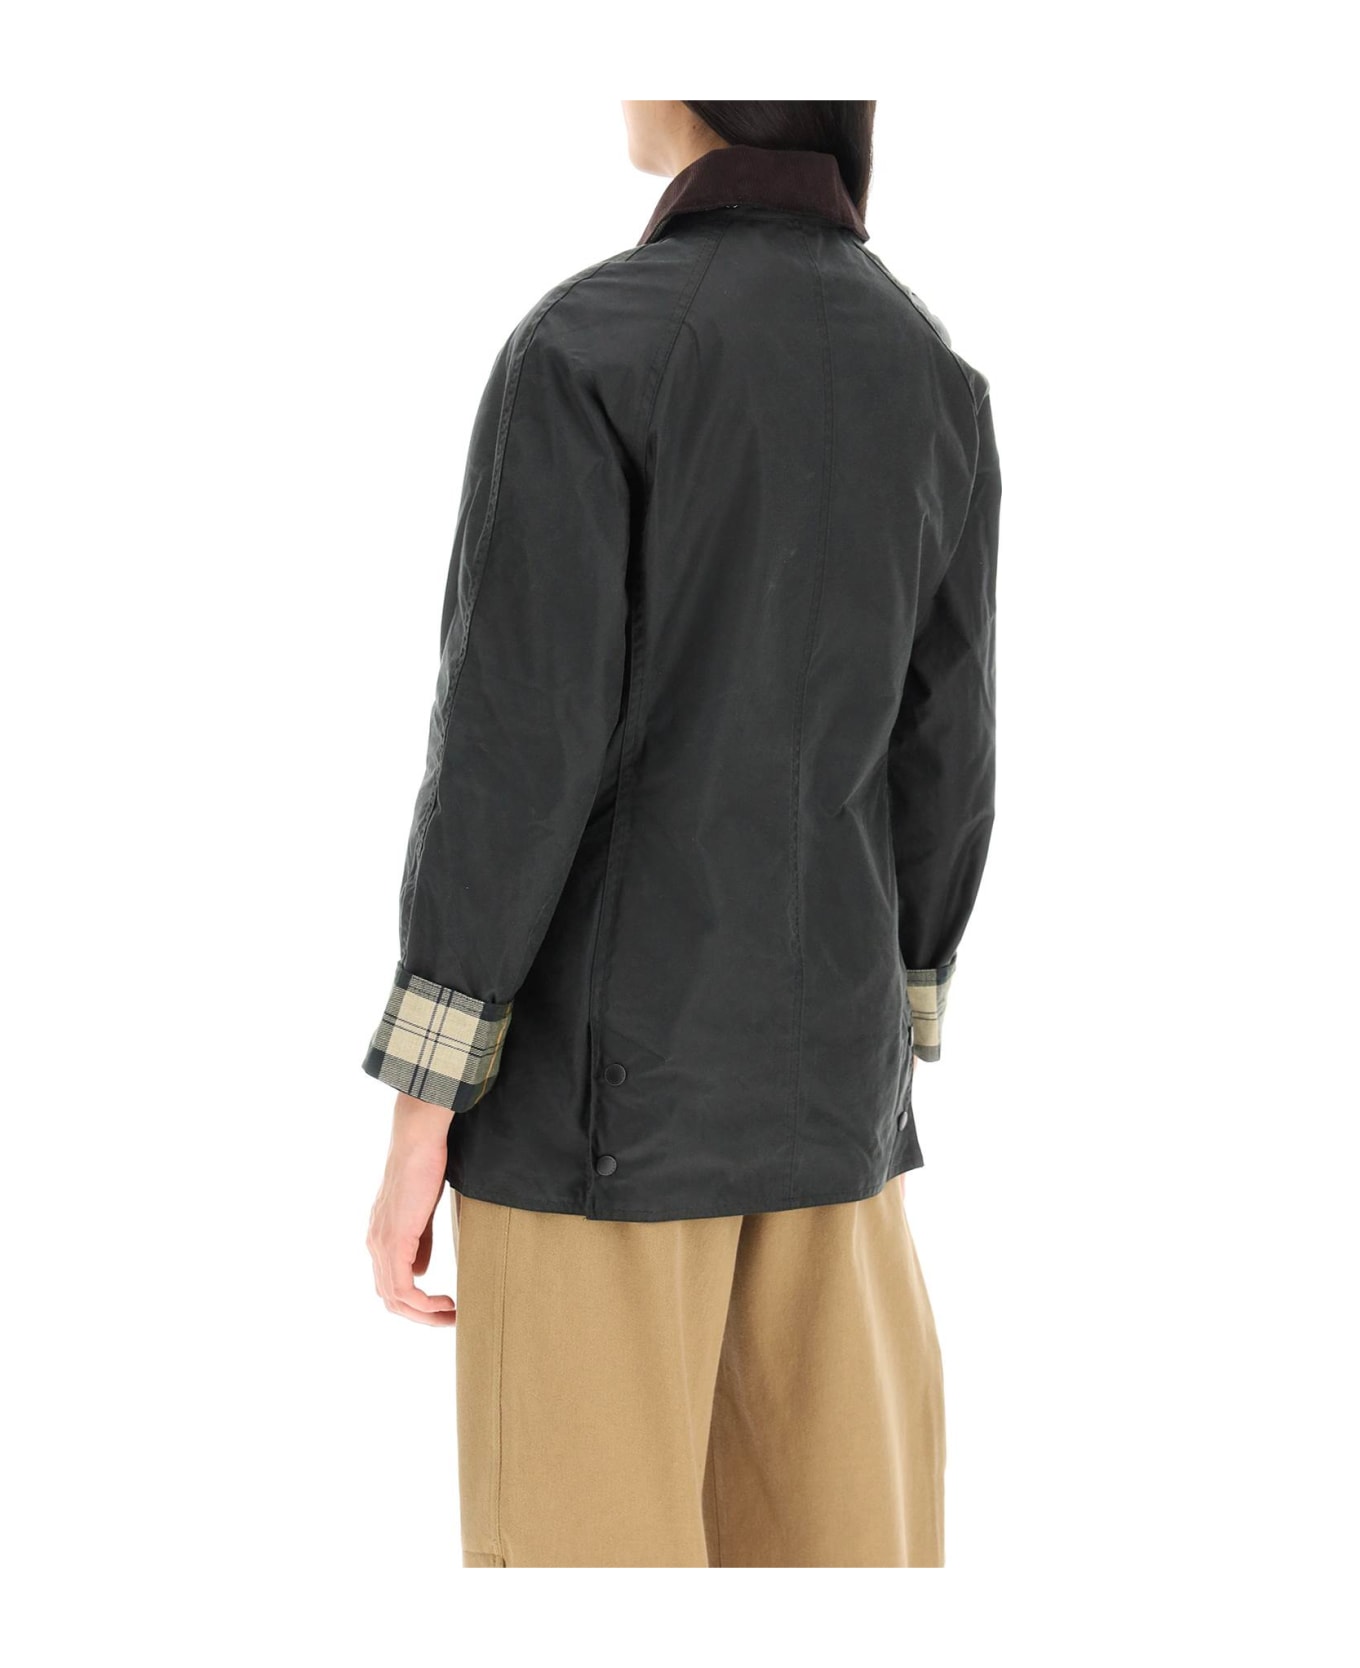 Barbour Beandell Waxed Cotton Jacket - green ブレザー